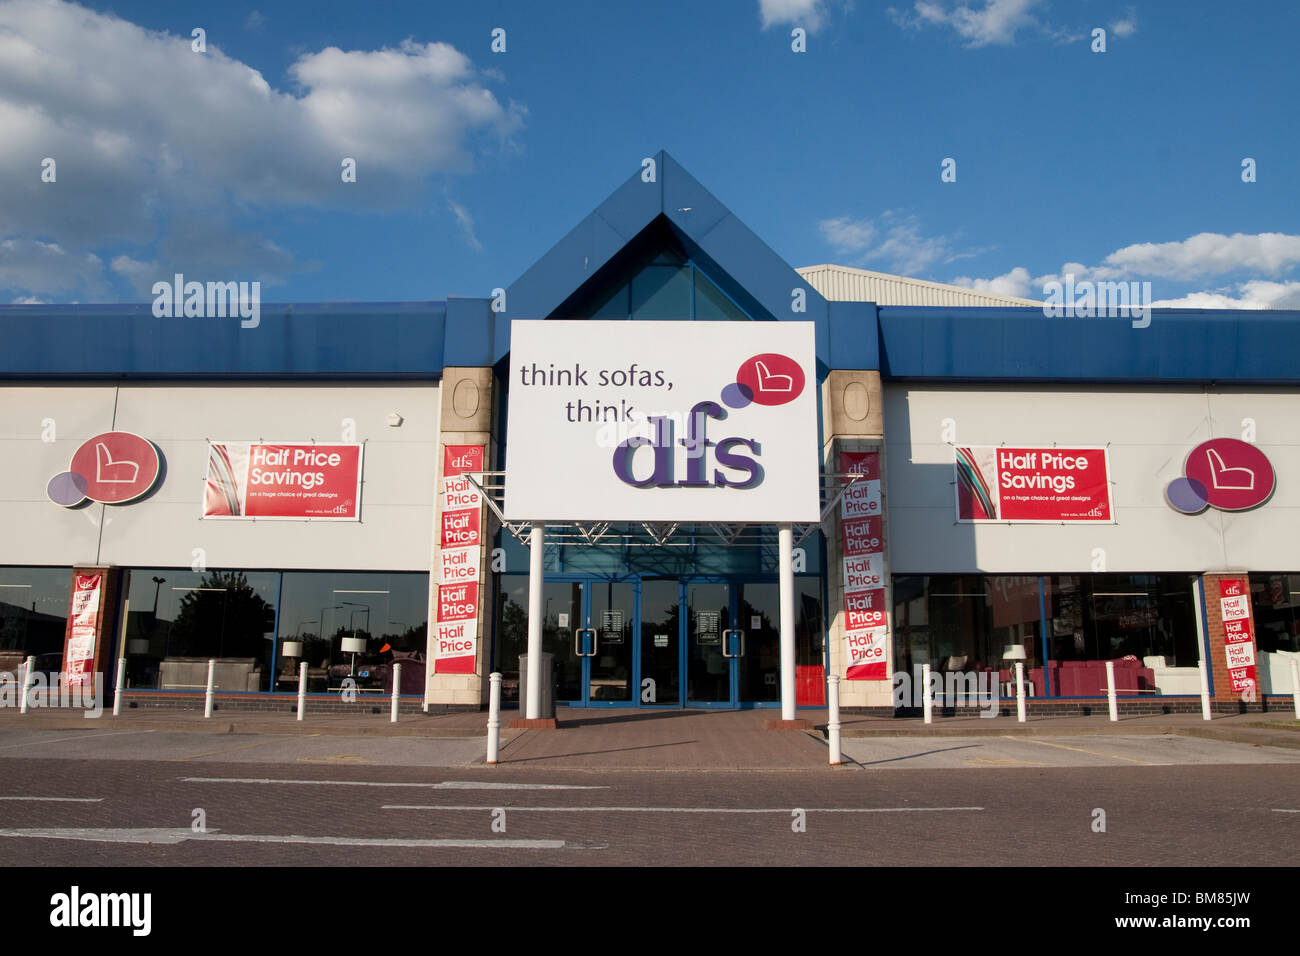 Northampton, UK - Oct 26, 2017: View Of DFS Sofa Experts Logo In Nene  Valley Retail Park. Stock Photo, Picture and Royalty Free Image. Image  90048605.